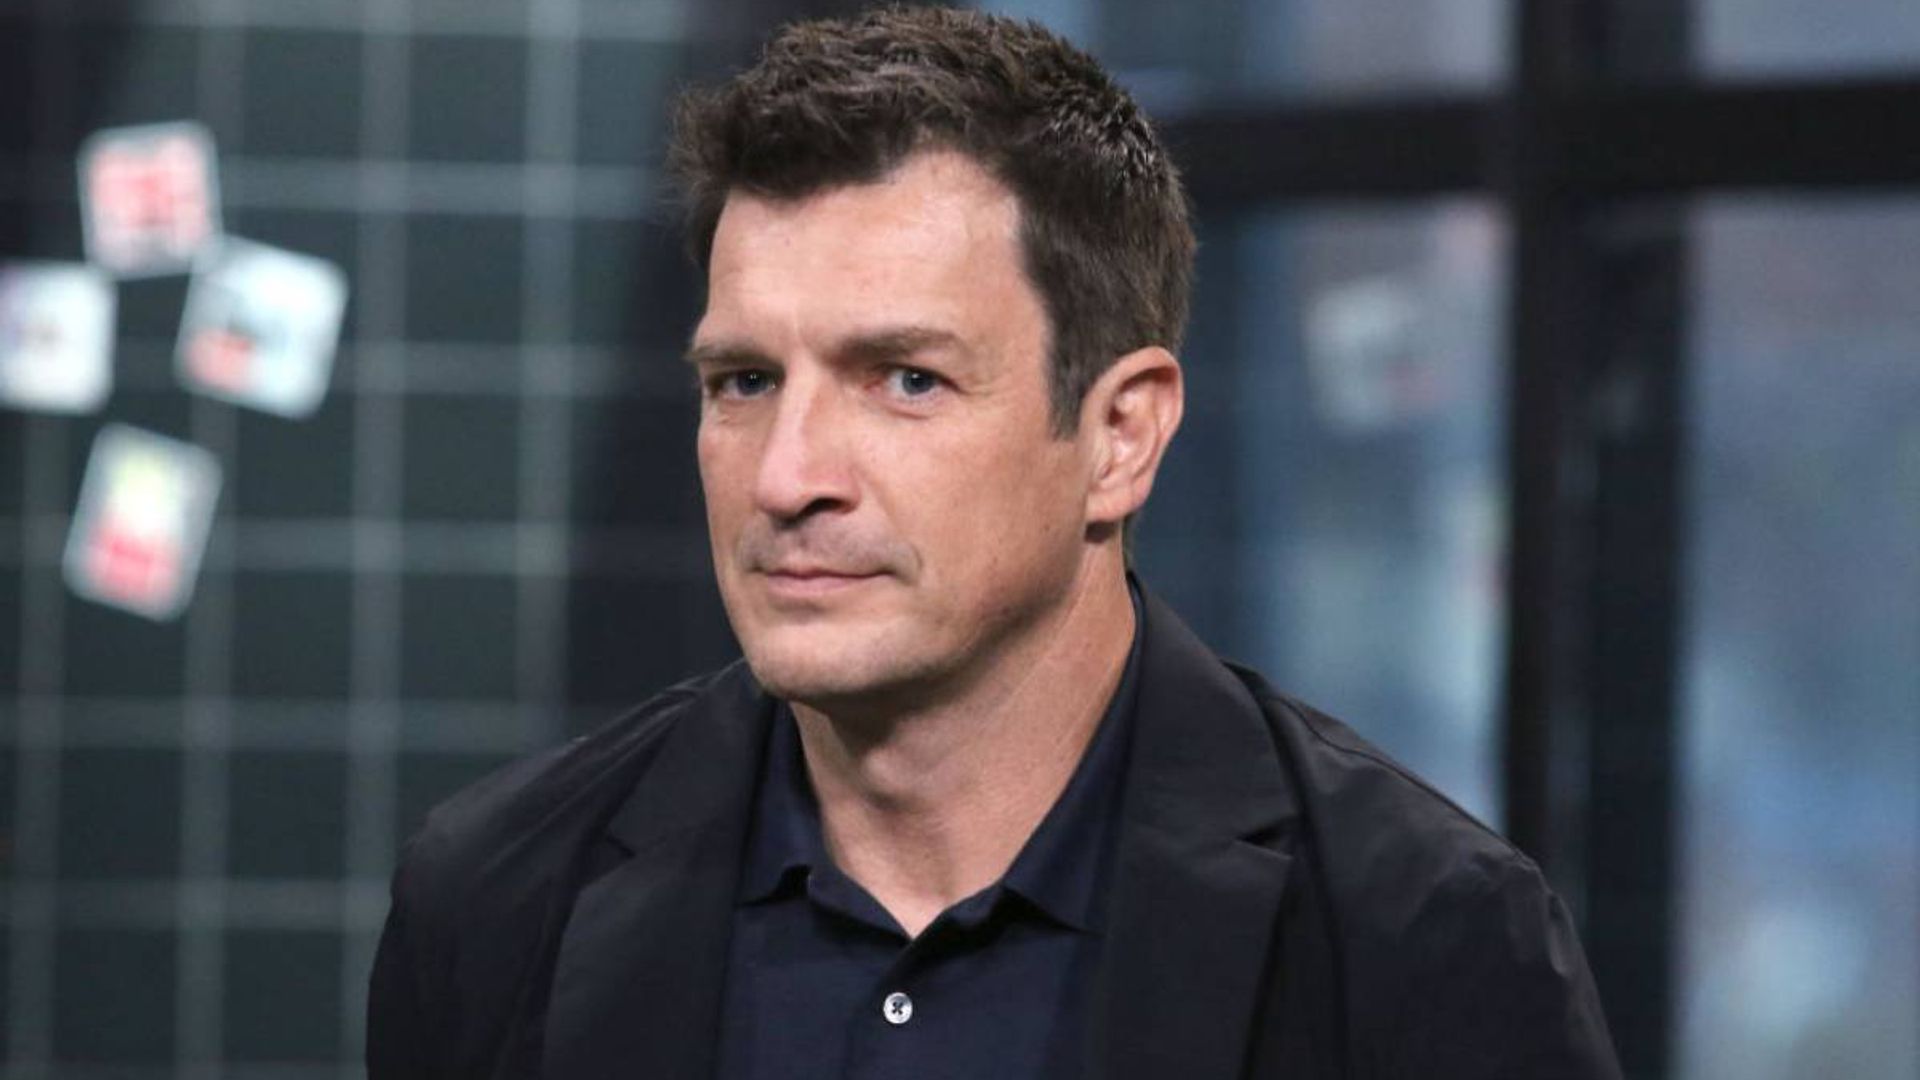 Nathan Fillion shares utter disappointment as he films season four of